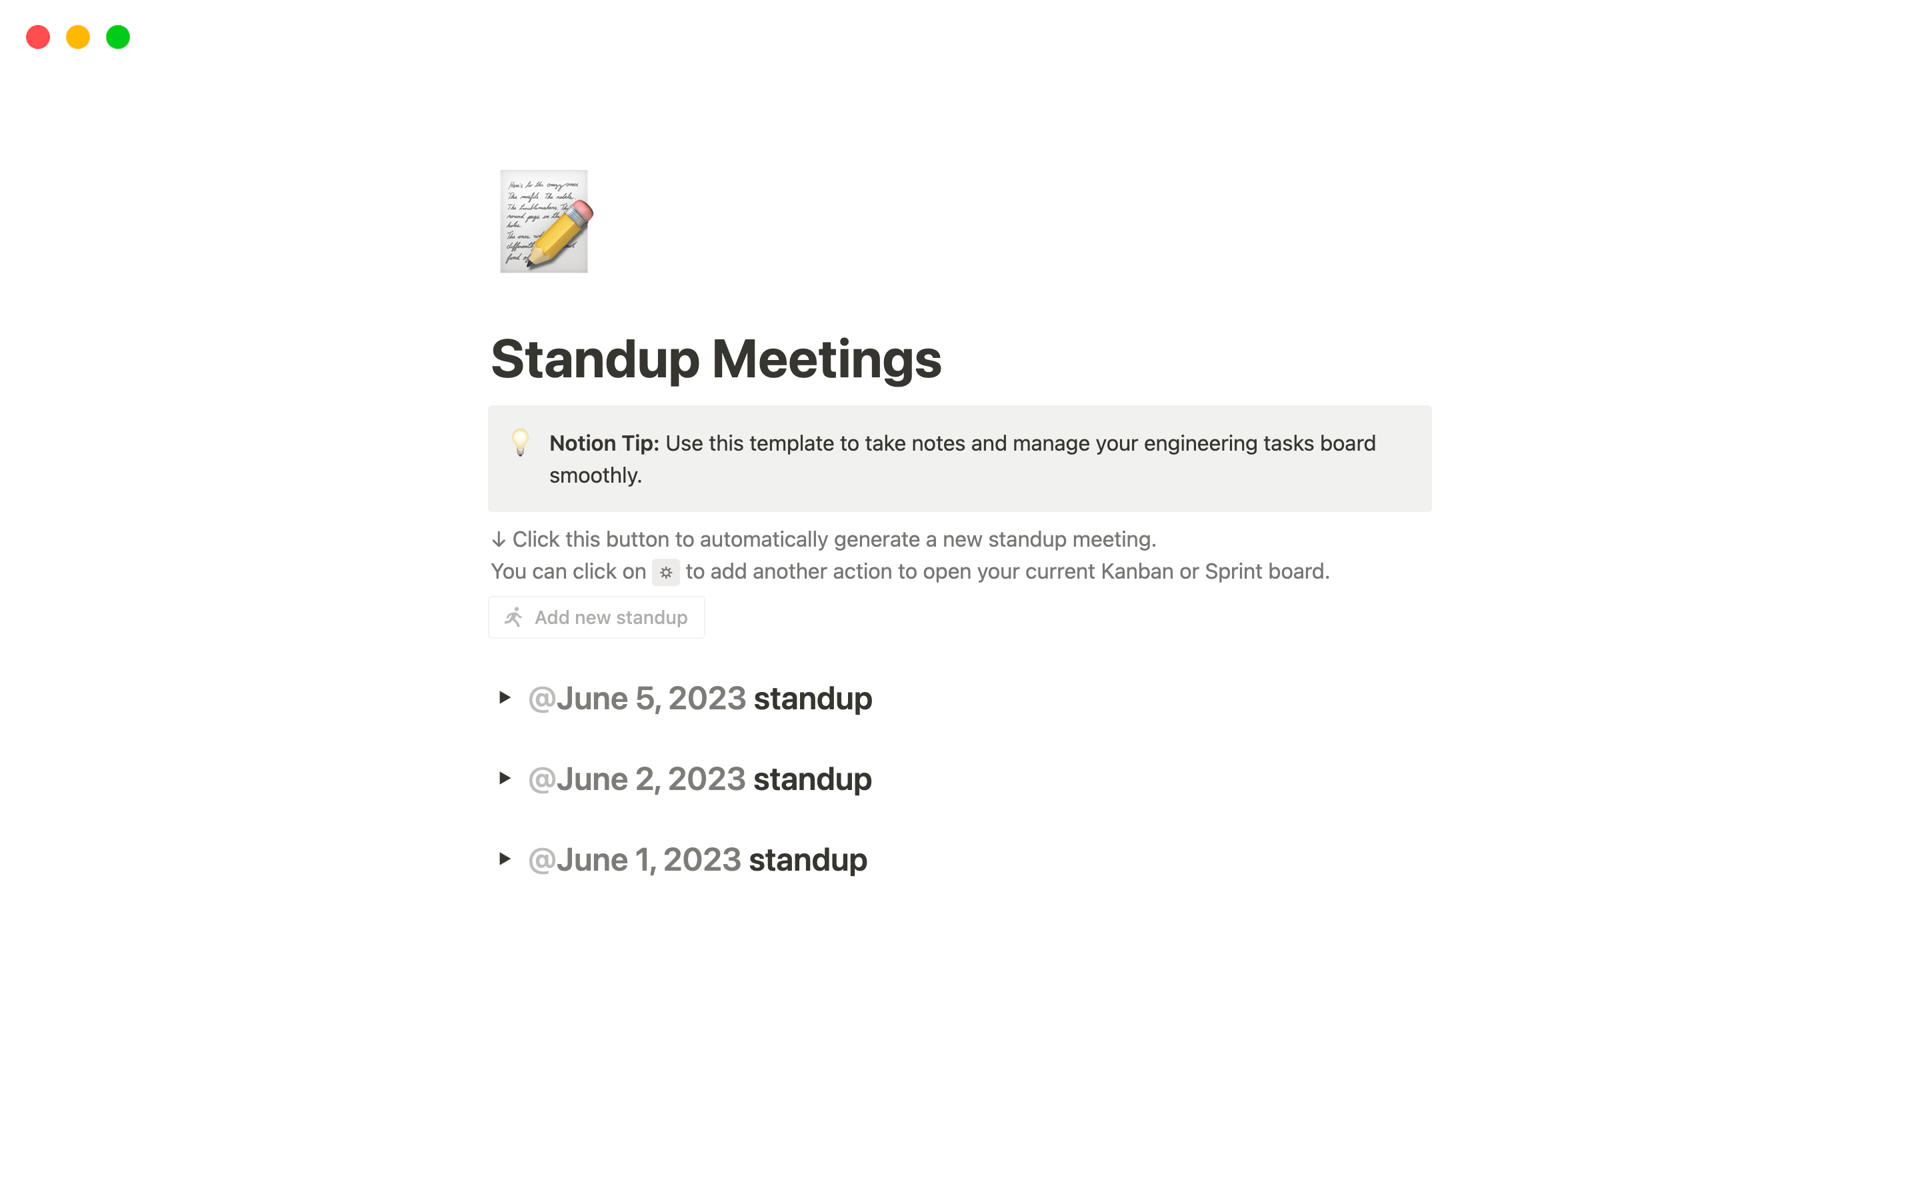 Easily create and organize your standup meeting notes with our Standup Meetings template.